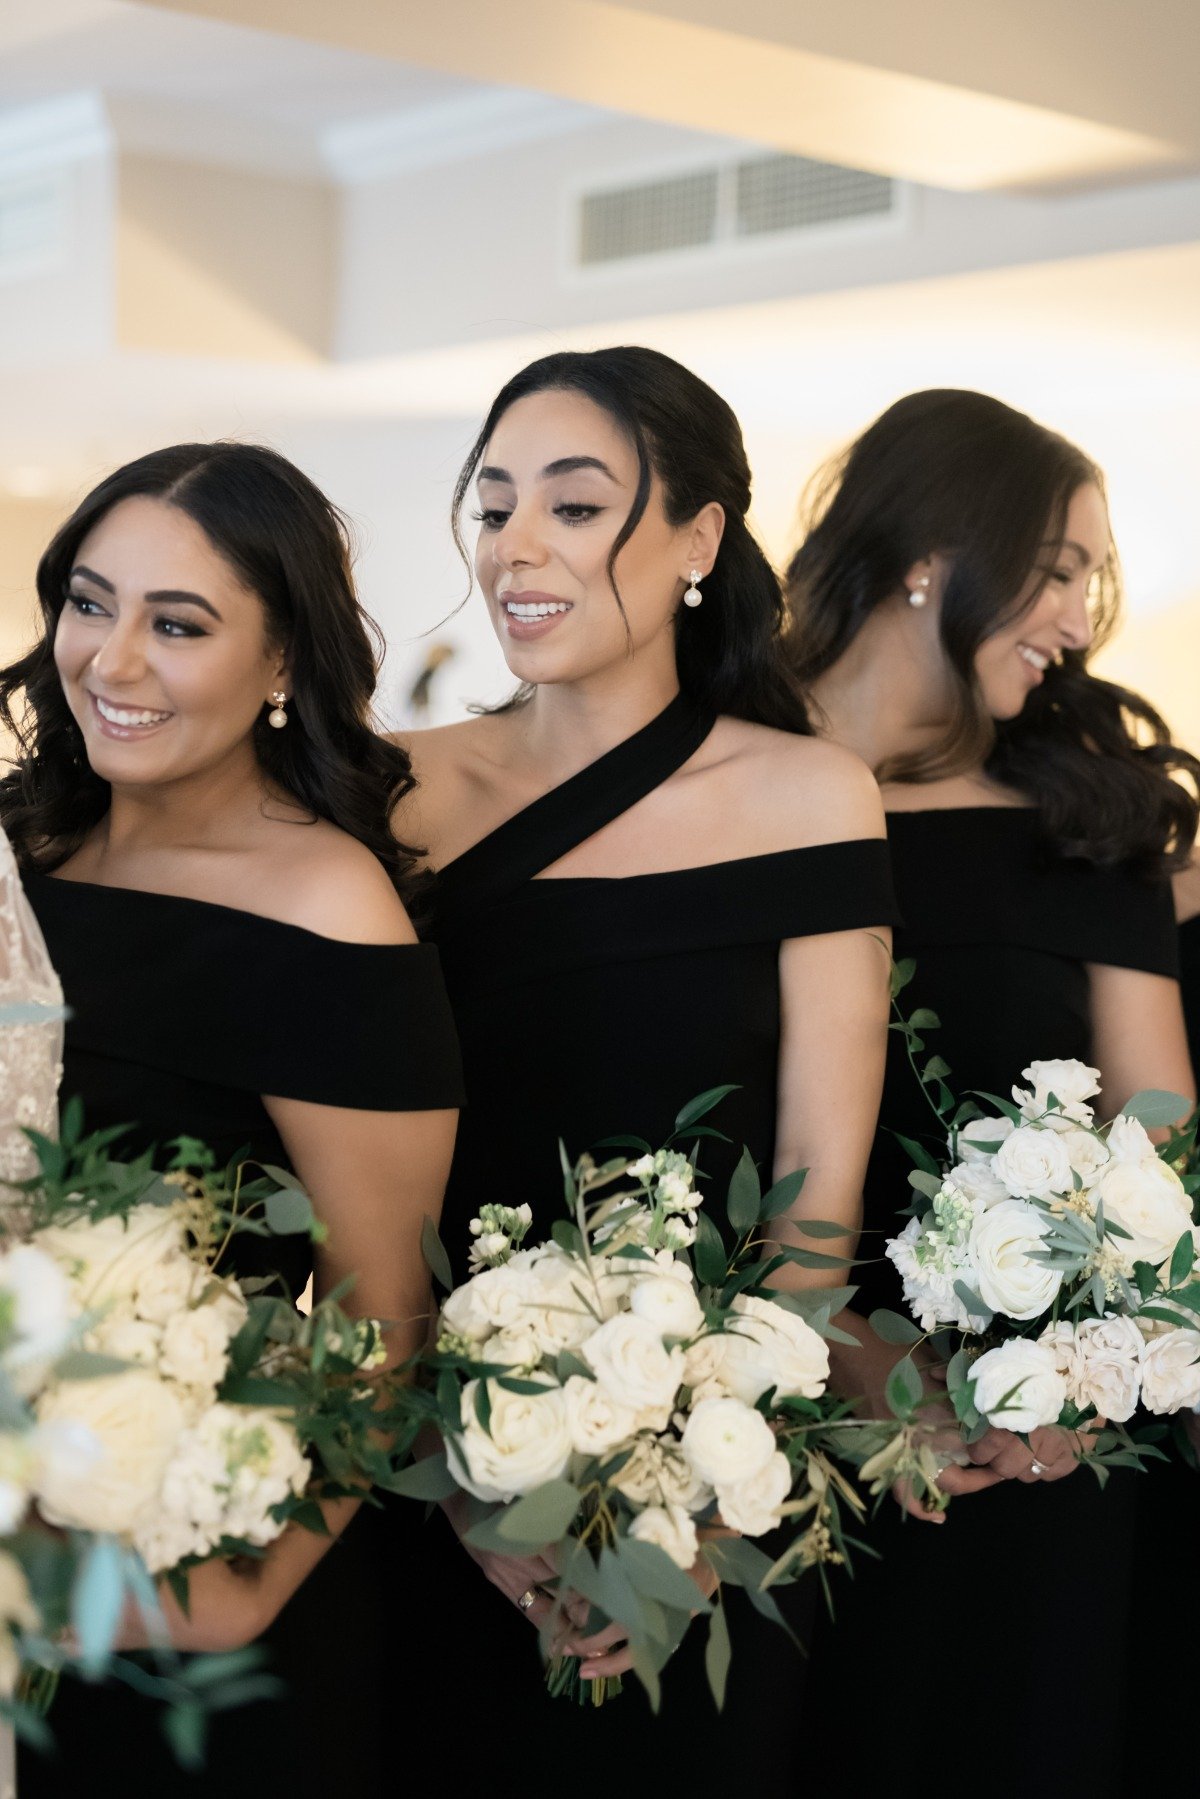 black bridesmaid dresses with white bouquets and pearl earrings